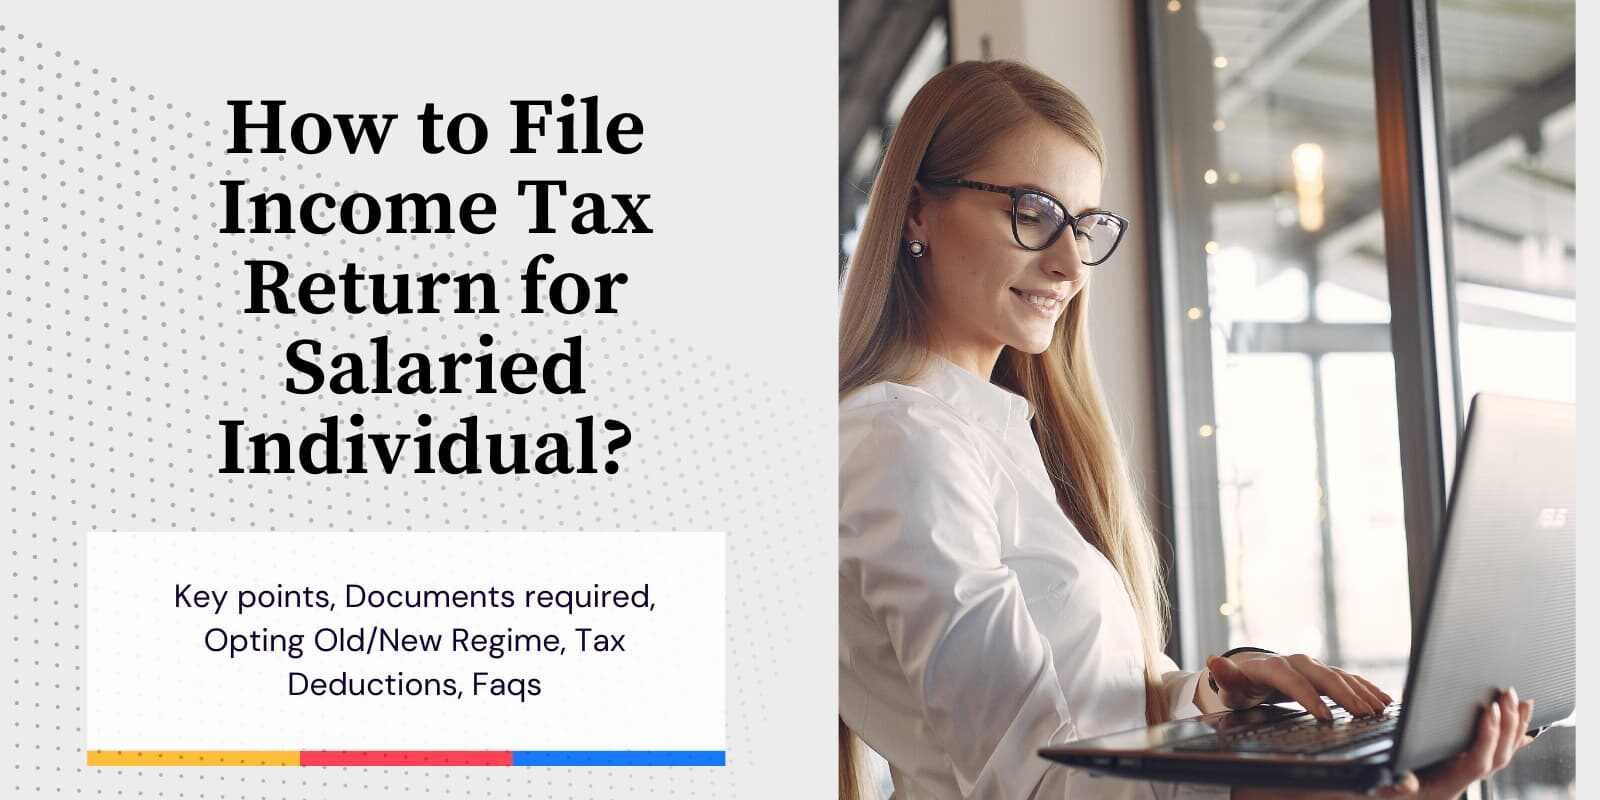 file your tax return